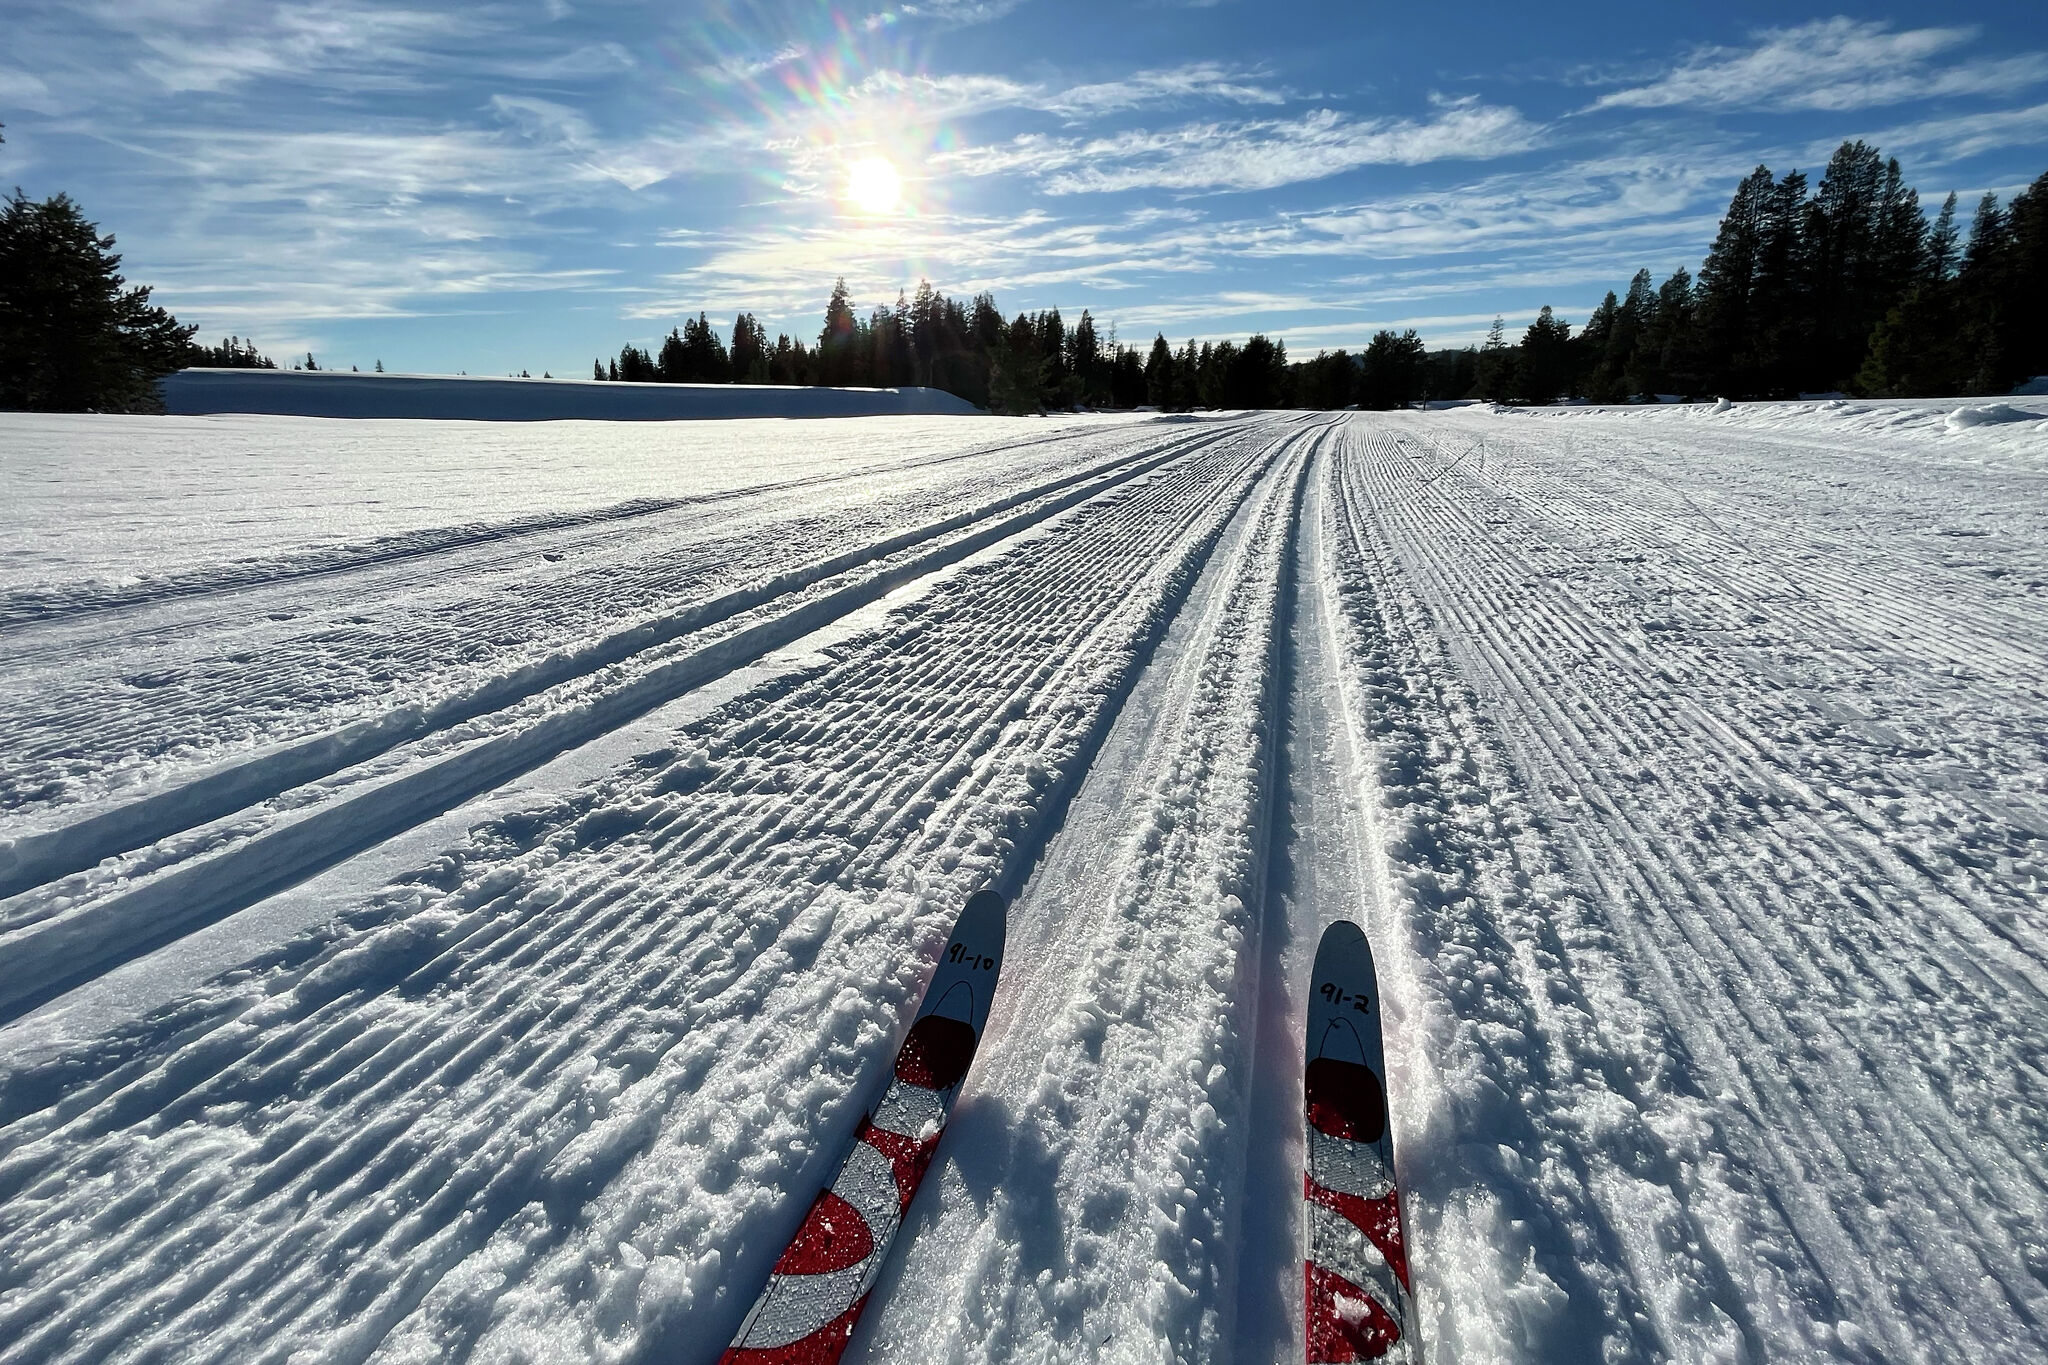 Cross-country skiing is the cheaper, easier way to enjoy the Sierra